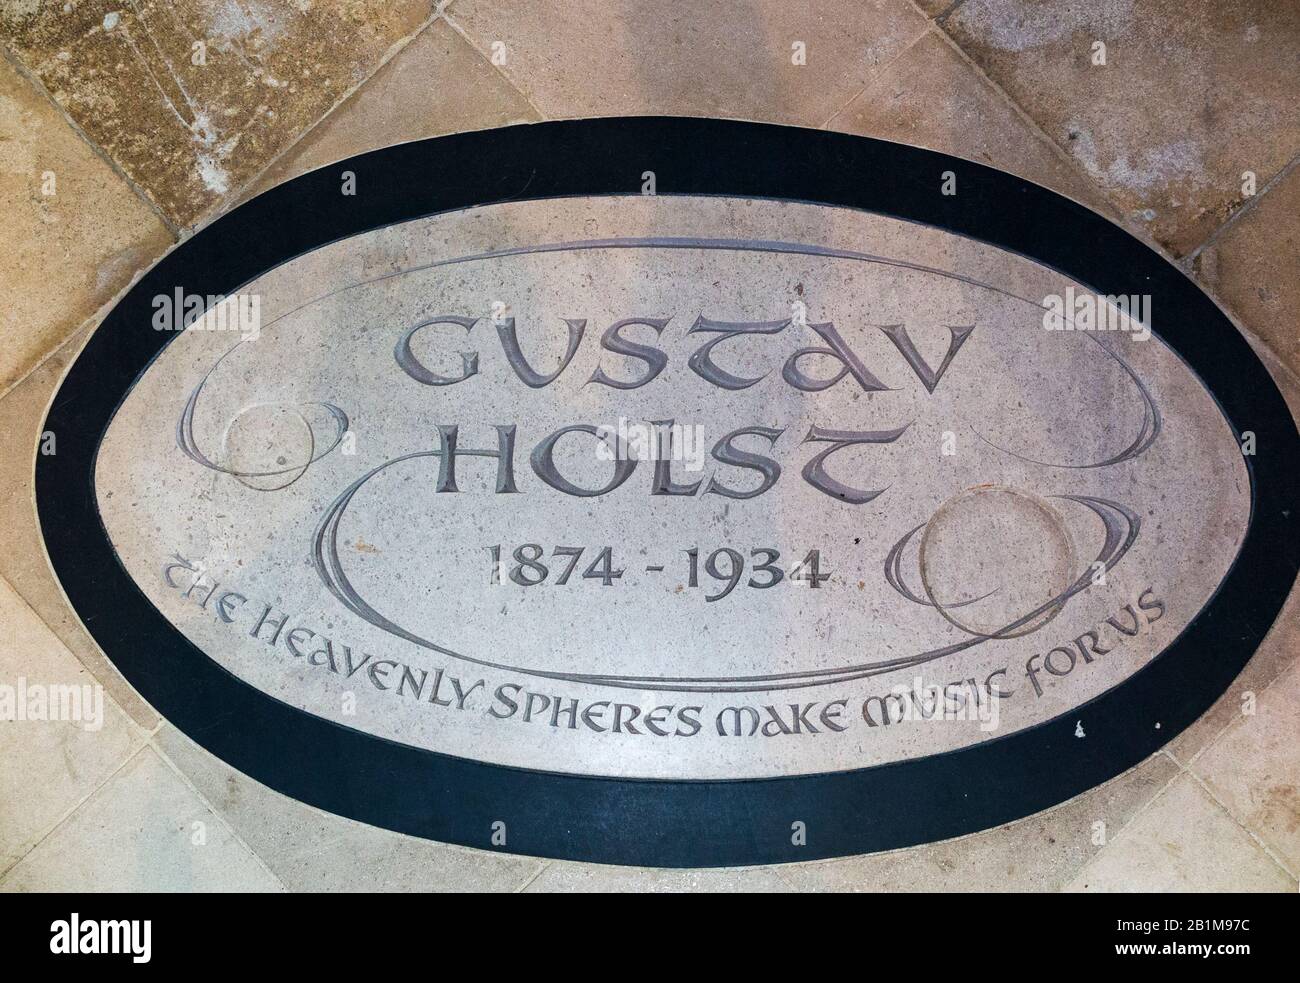 Gustav Holst / Holsts Memorial stone plaque in the floor Chichester Cathedral. UK (114) Stock Photo